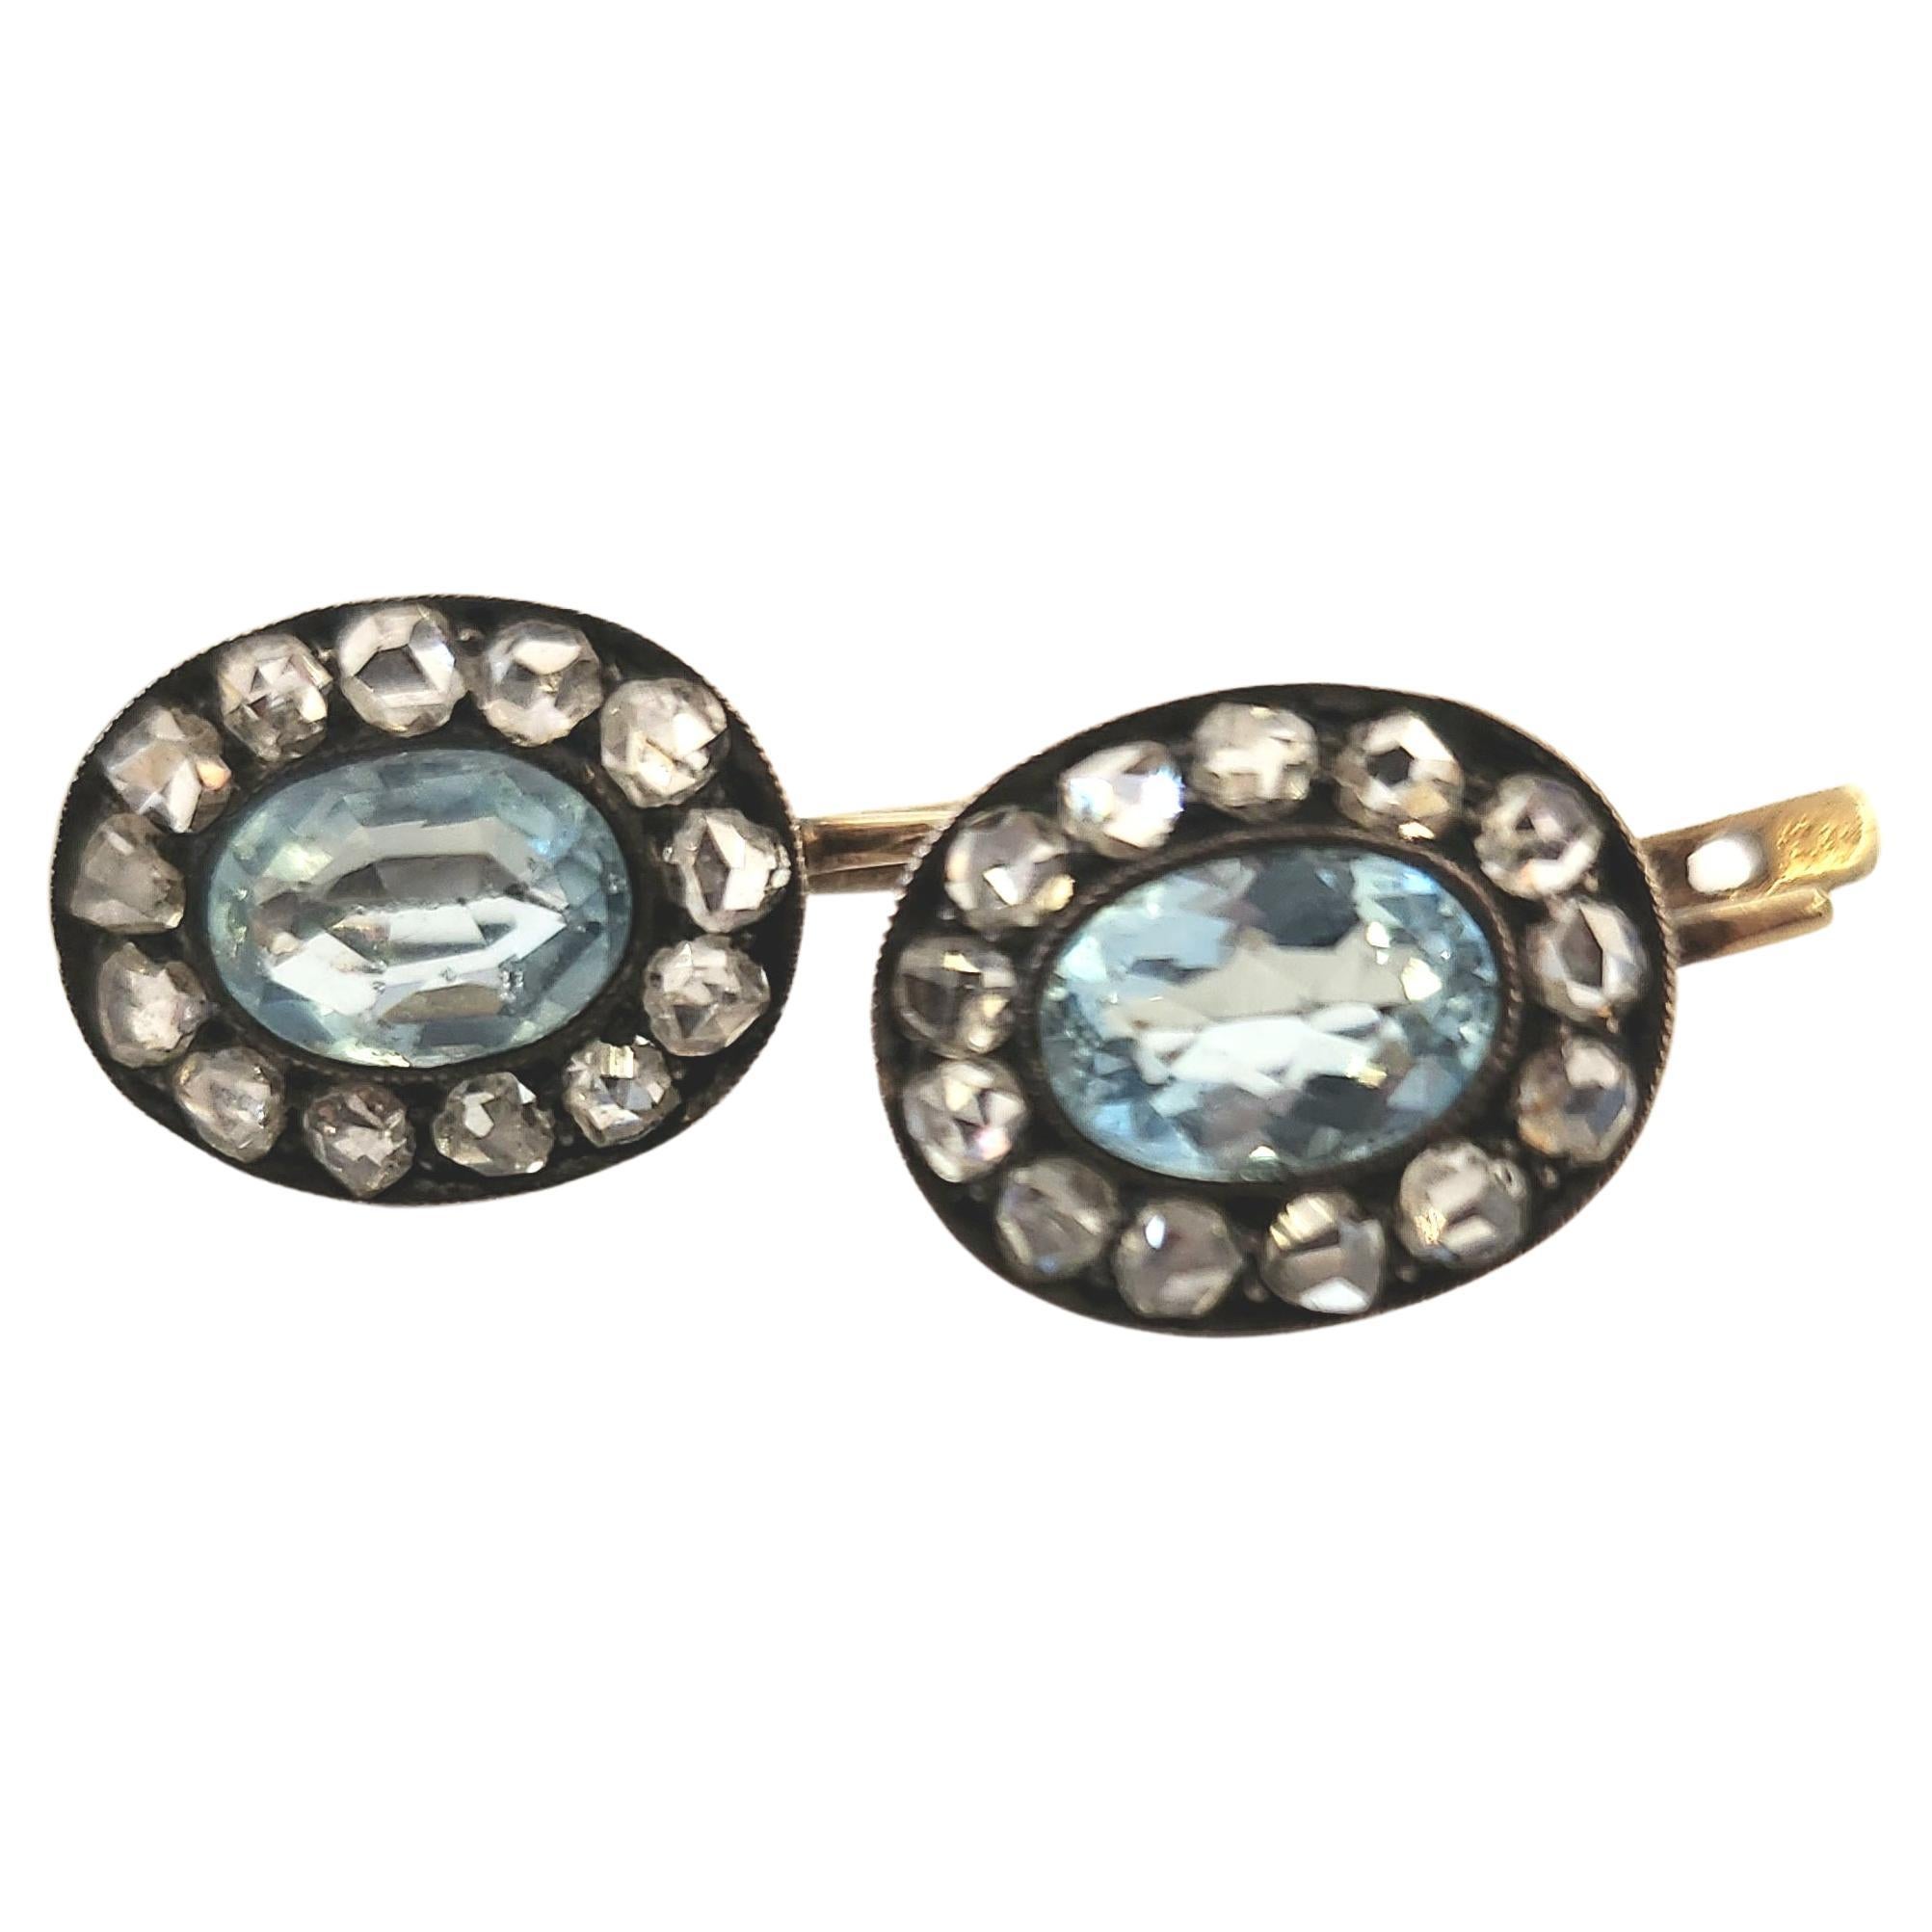 Antique russian earrings centered with light blue oval cut aqua marine stone with a diameter 7.30mm flanked with rose cut diamonds with estimate weight of 0.60 ct earrings head diameter 13mm in 14k gold setting  topped with silver was made in moscow